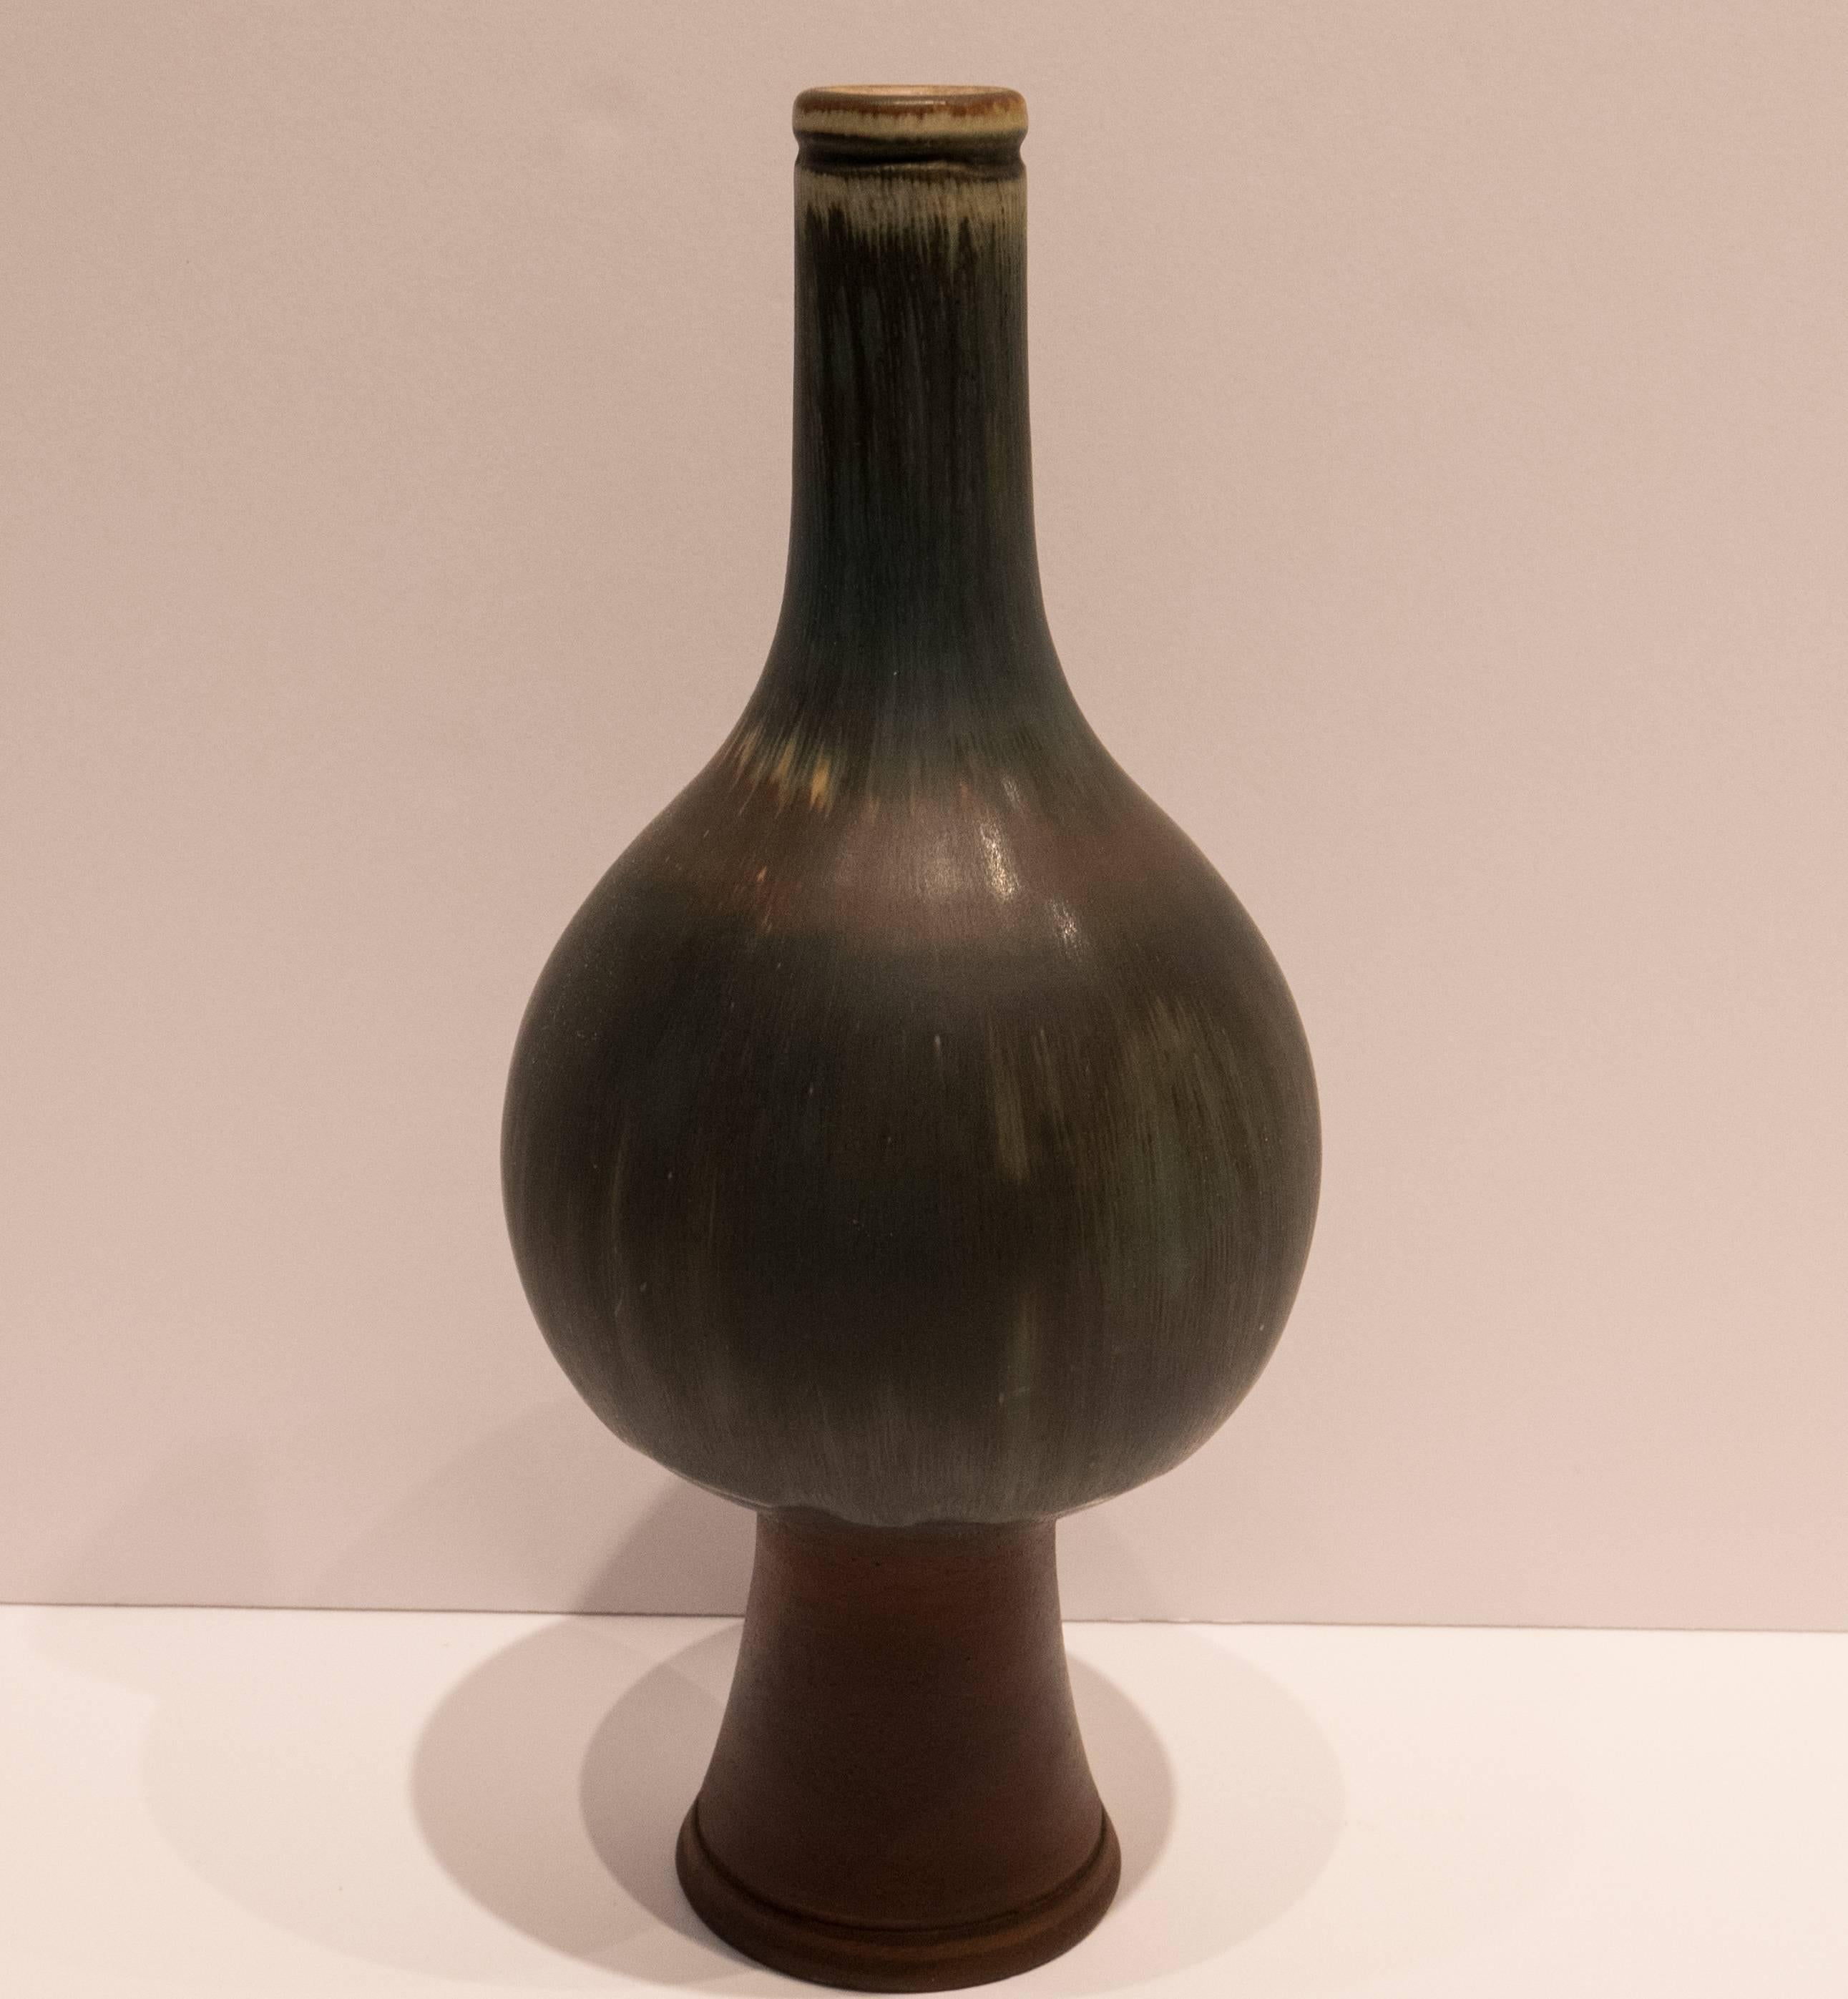 Exceptional vase with bulbous centre and long neck, with a subtle modulated multi-chromatic drip glaze and unglazed tapering foot. From Wilhelm Kage's Farsta series, essentially his studio work at Gustavsberg, produced, circa 1950. Full incised